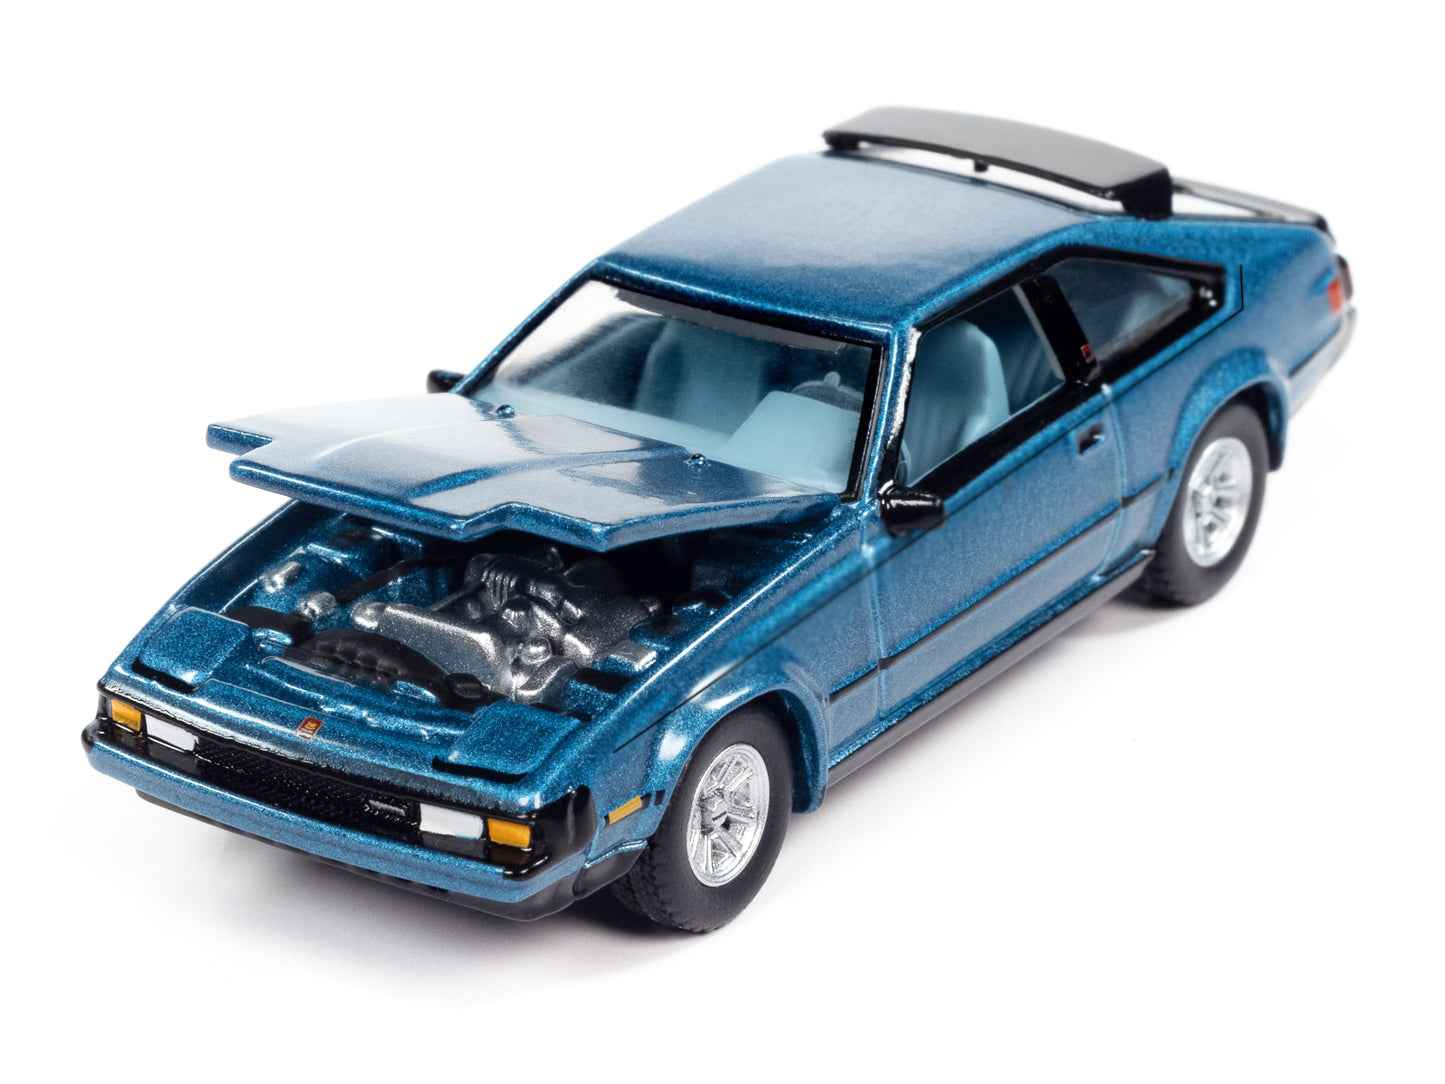 1982 Toyota Celica Supra Light Blue Metallic with Blue Interior "Import Legends" Limited Edition 1/64 Diecast Model Car by Auto World